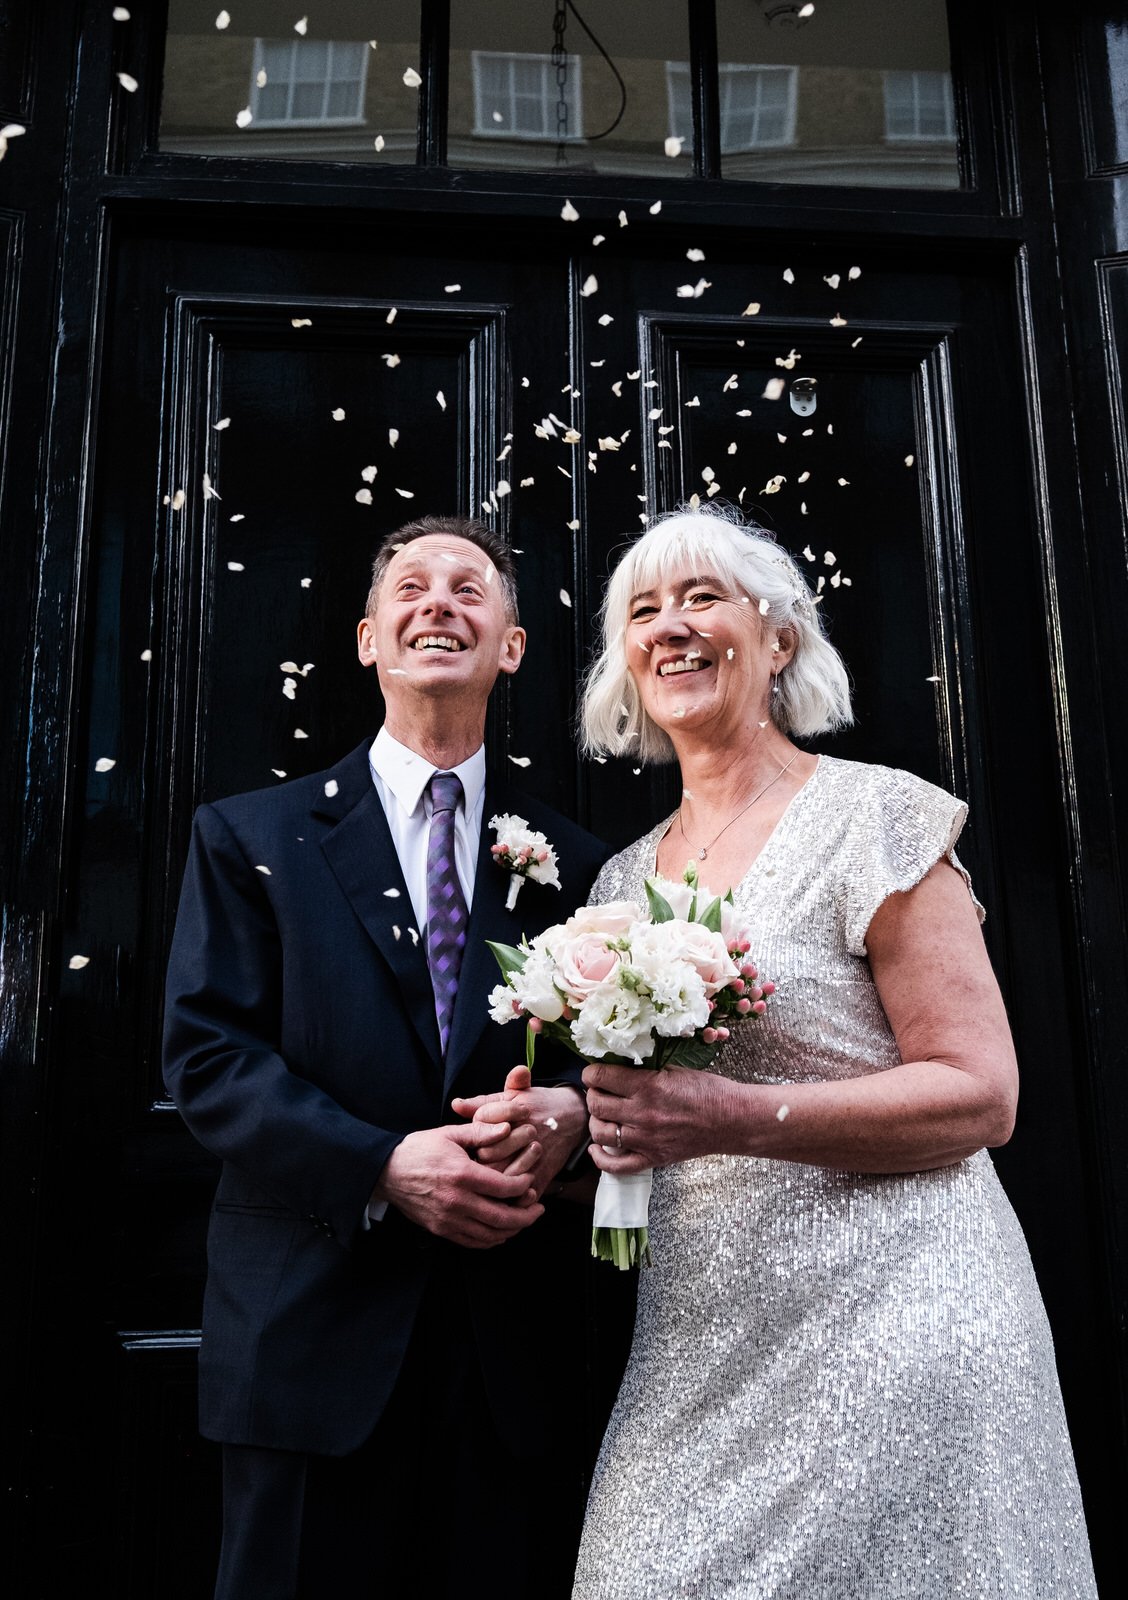 Central London Elopement Wedding Photography